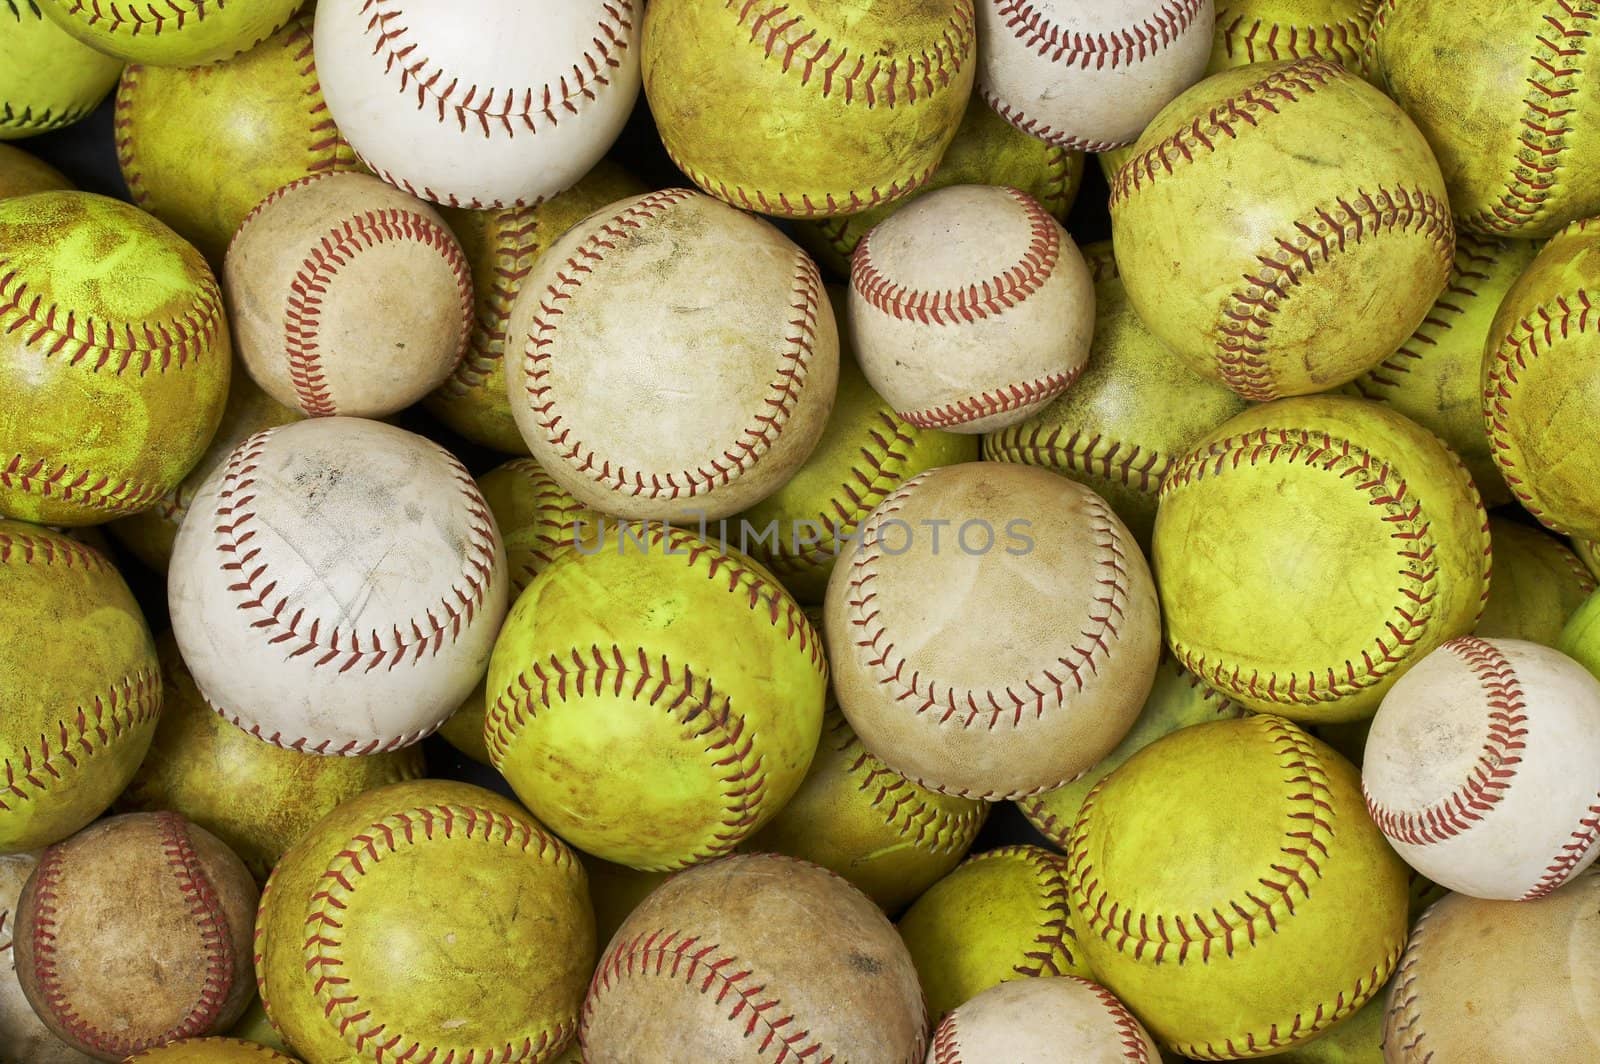 a picture of old softballs and baseballs